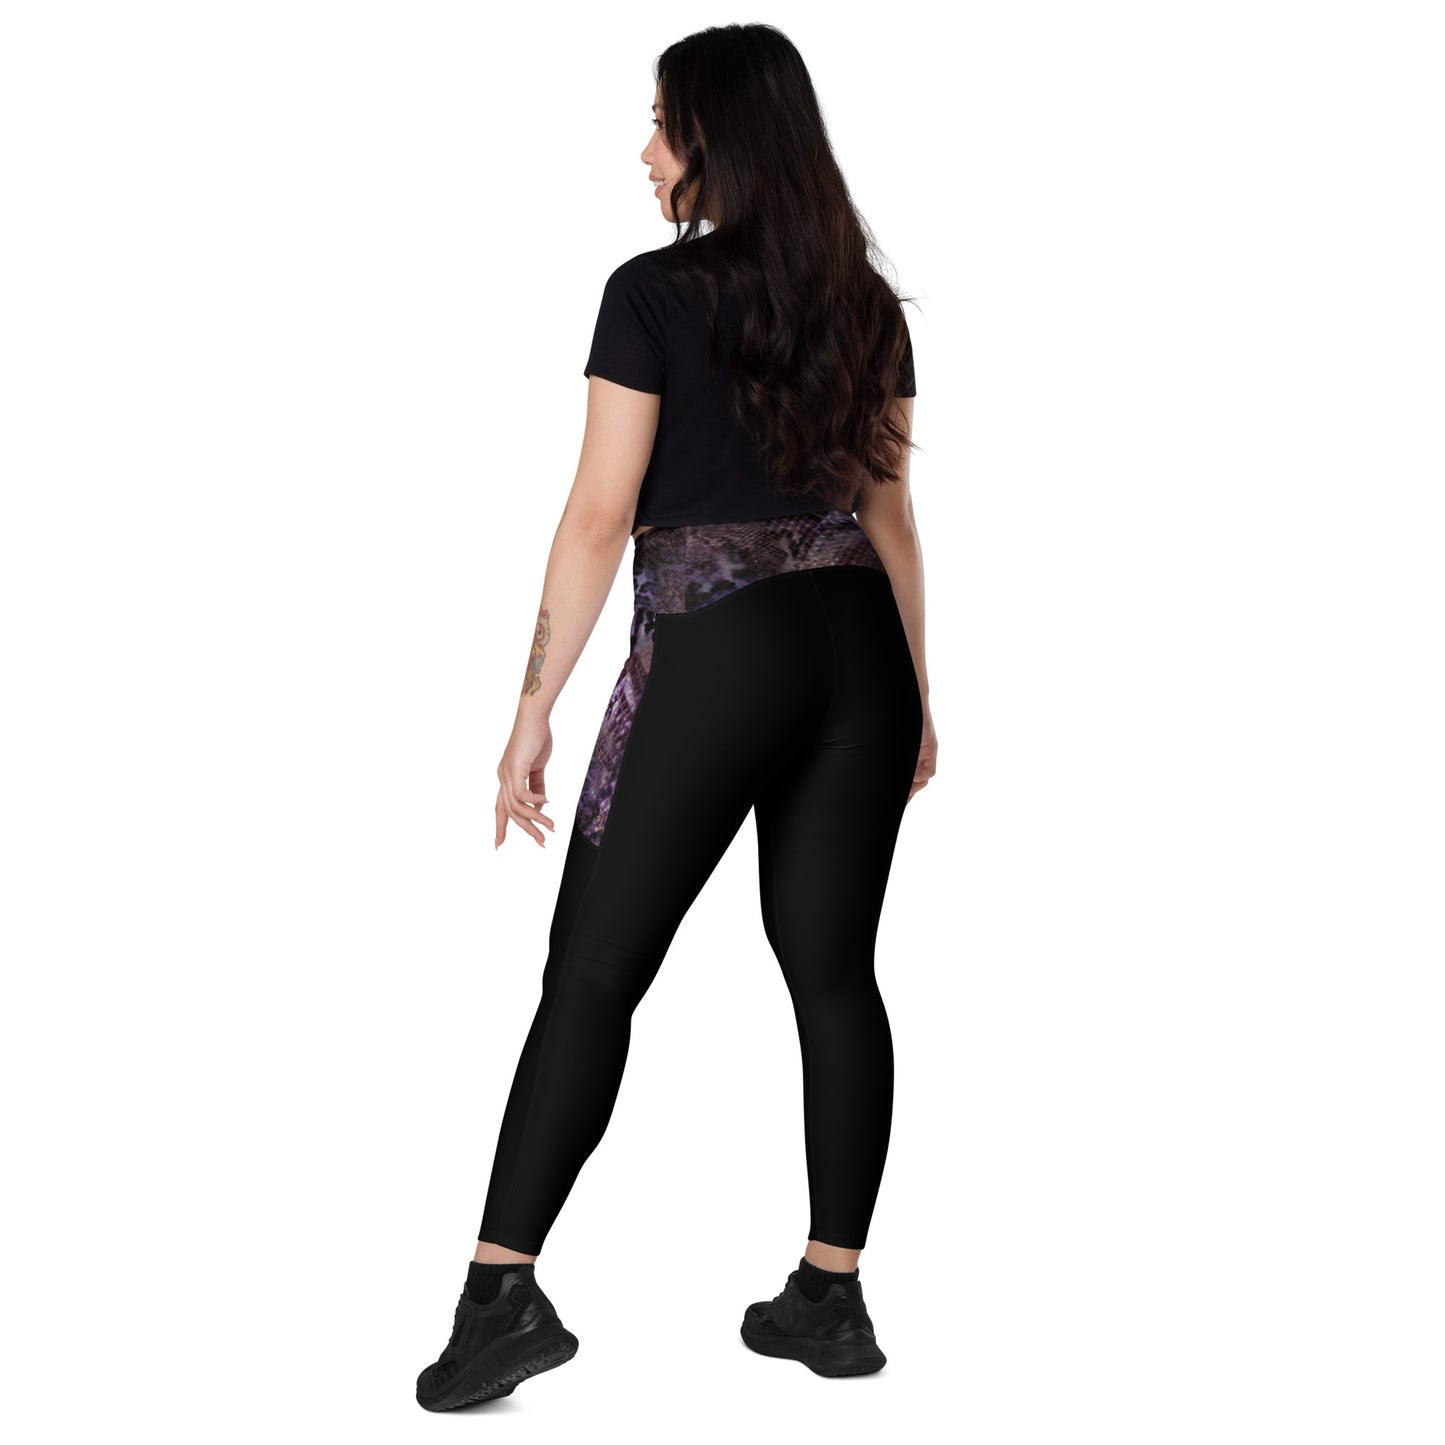 Humble Sportswear, women's black high waisted leopard print pocket leggings with semi-compression